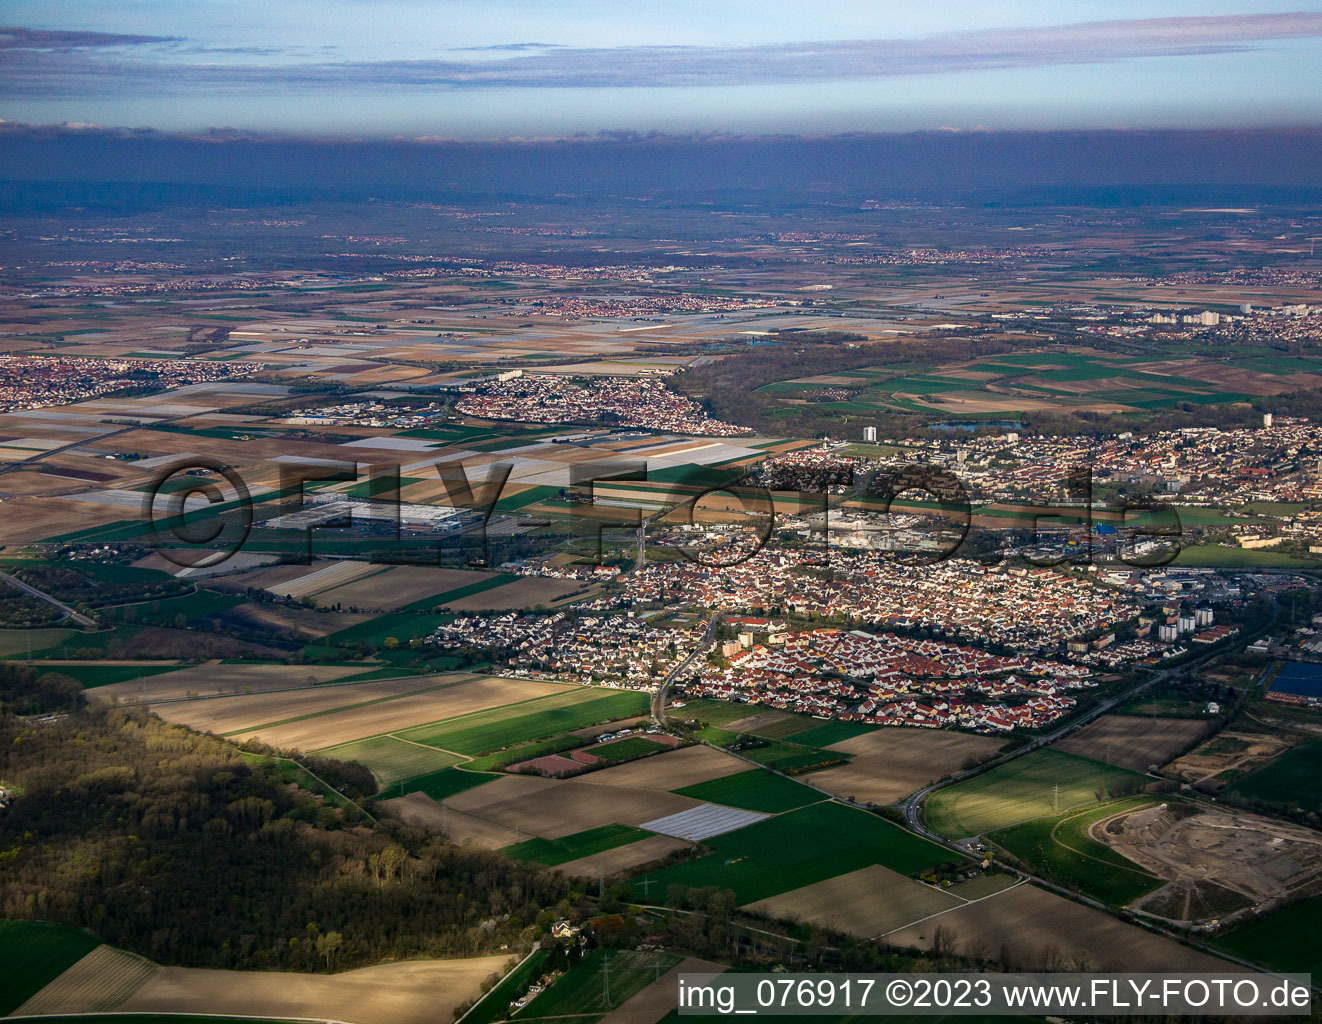 Oblique view of Neuhofen in the state Rhineland-Palatinate, Germany